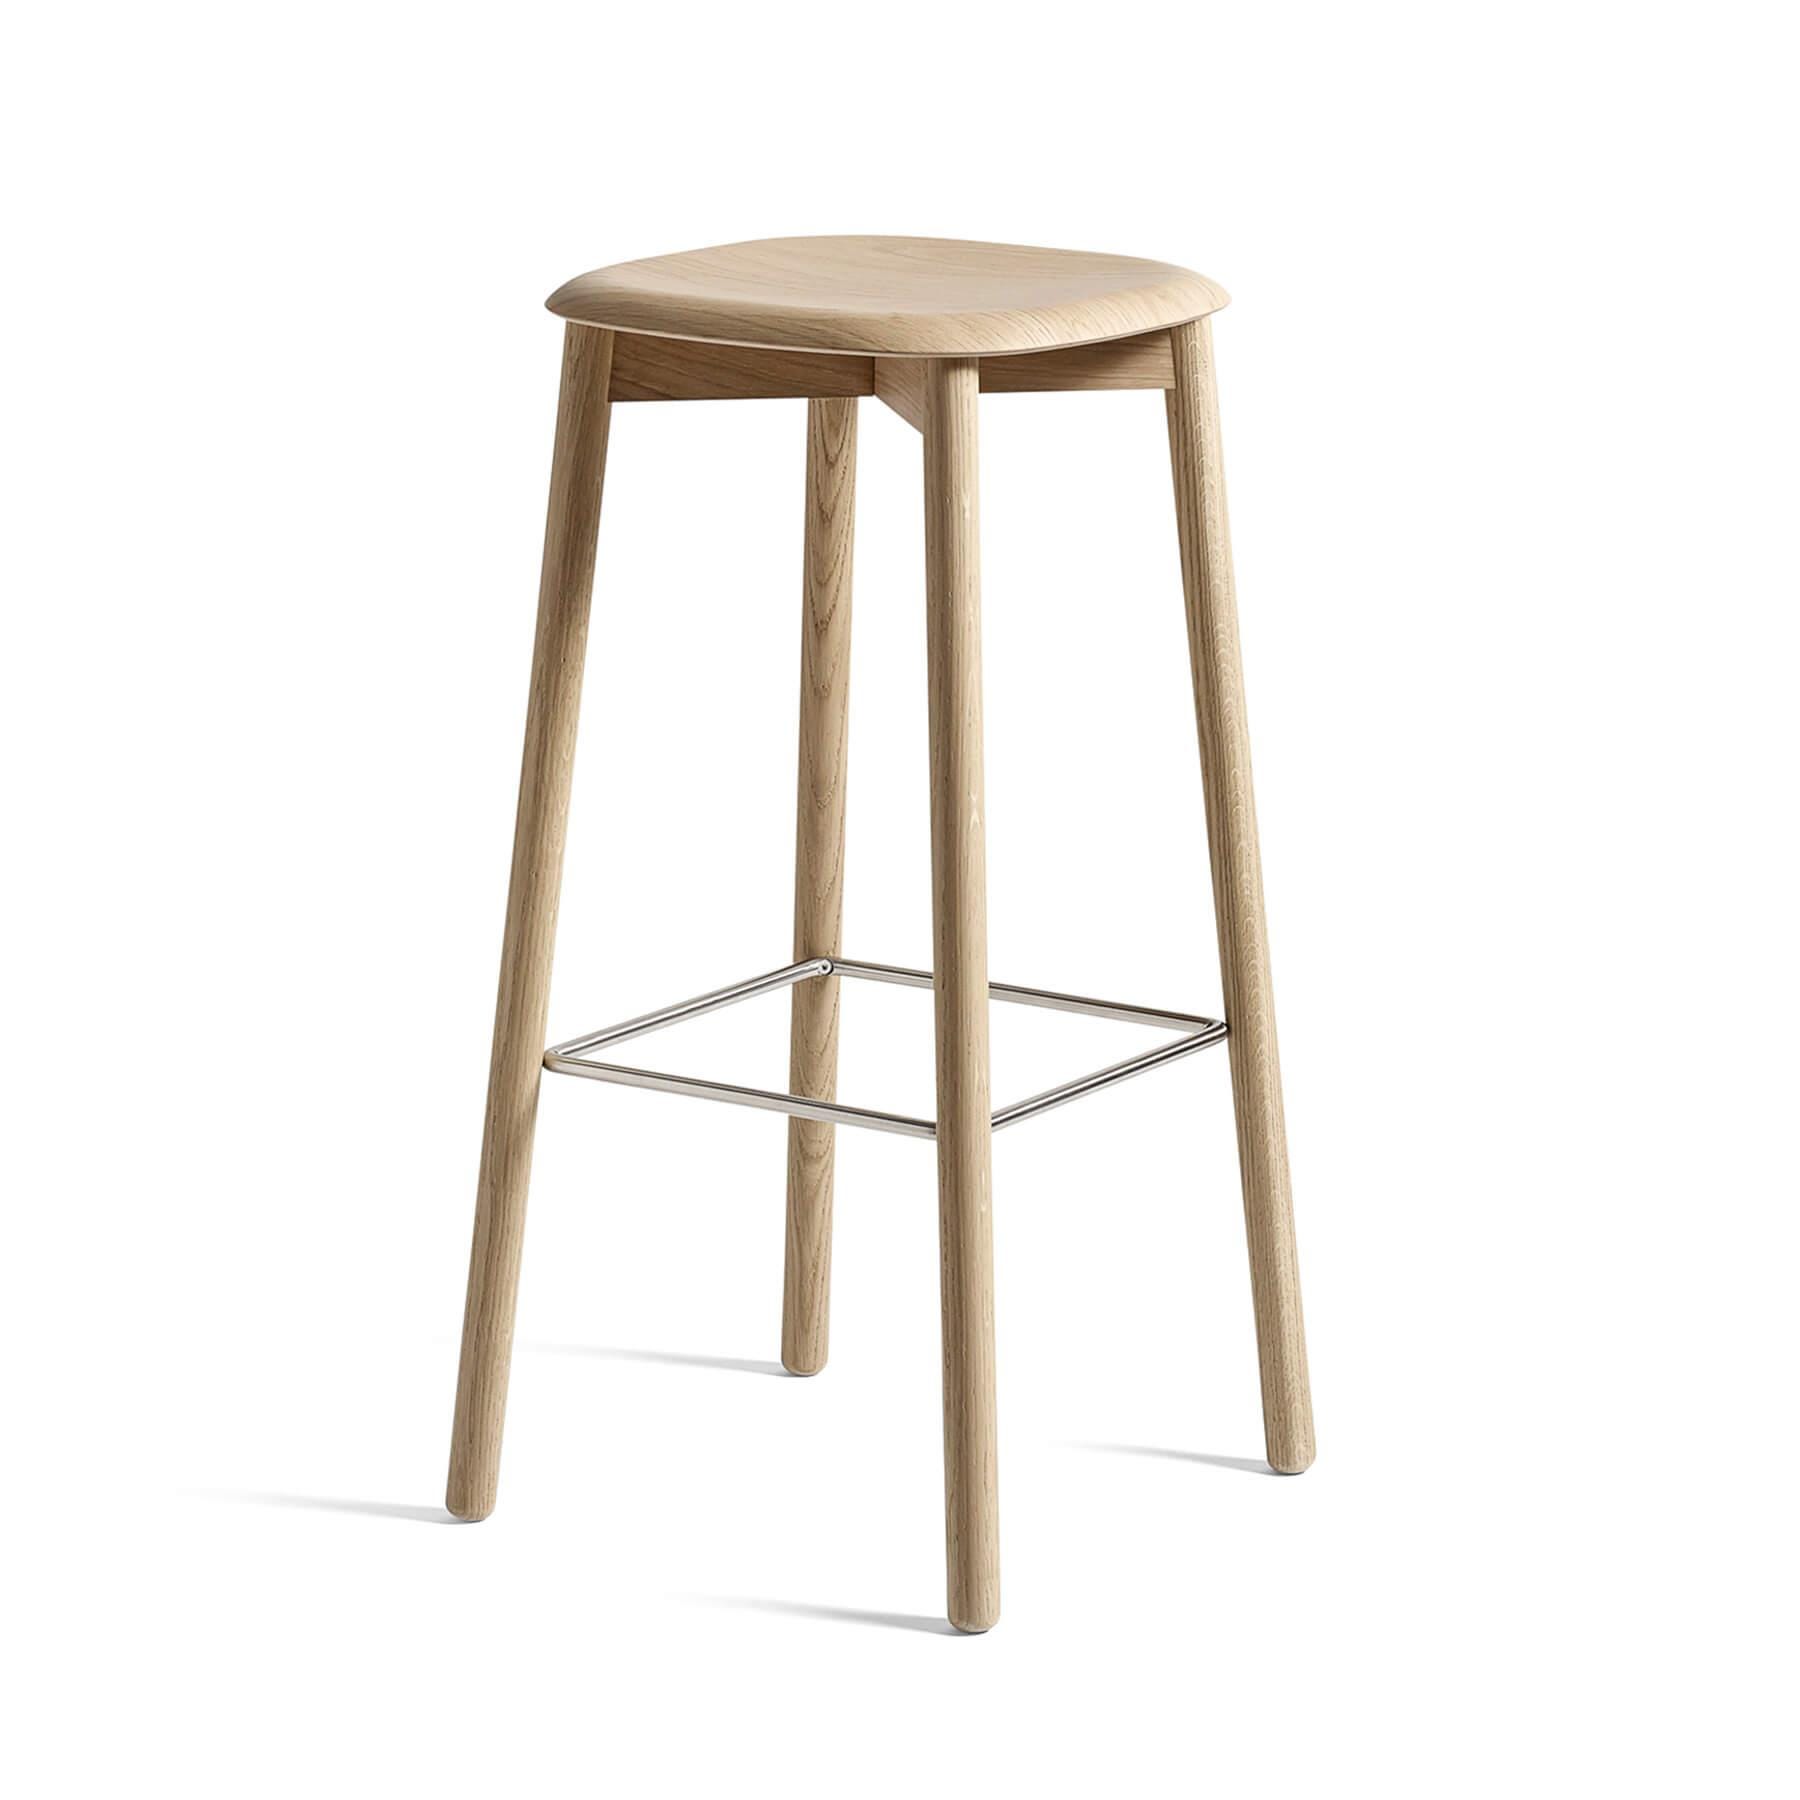 Hay Soft Edge 82 Bar Stool High Lacquered Oak Designer Furniture From Holloways Of Ludlow